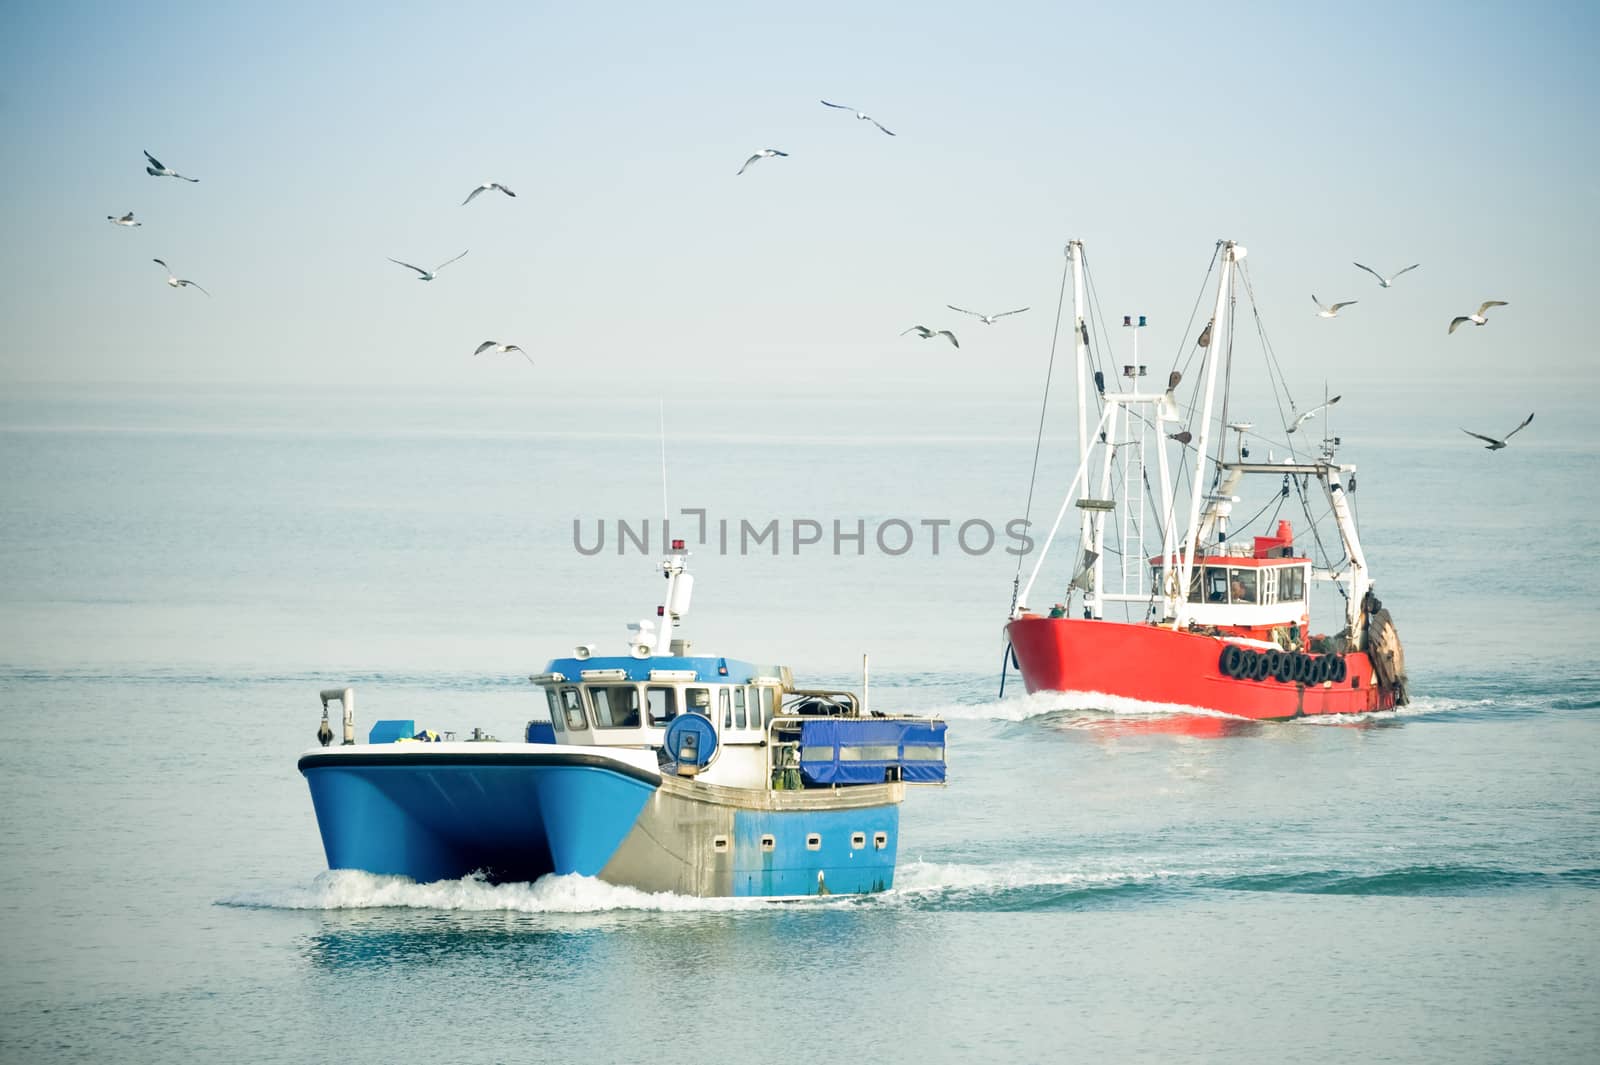 fishing trawlers returning to port on a hazy day surrounded by seagulls